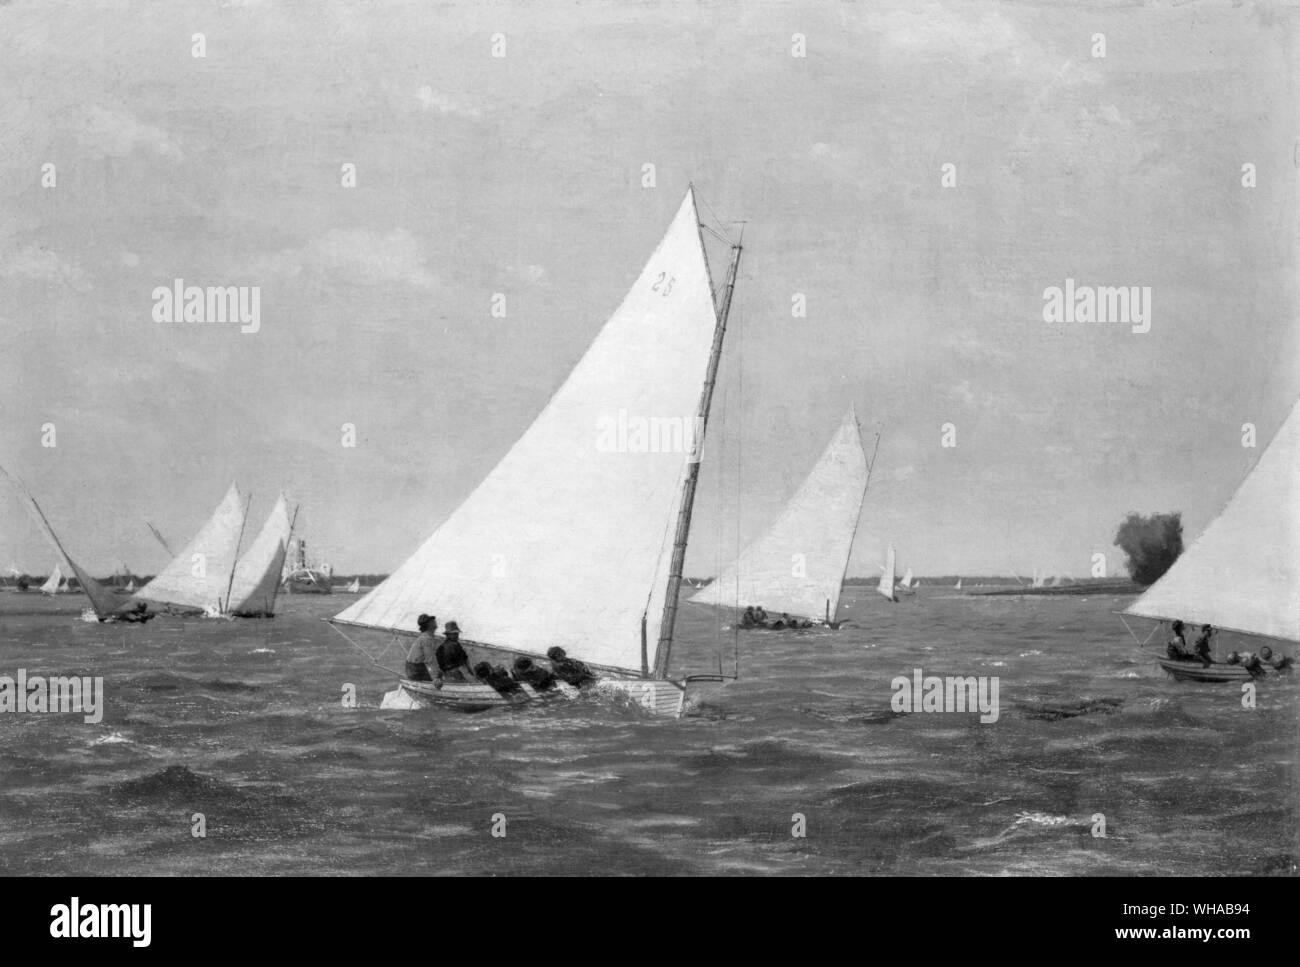 Sailboat Black and White Stock Photos & Images - Alamy